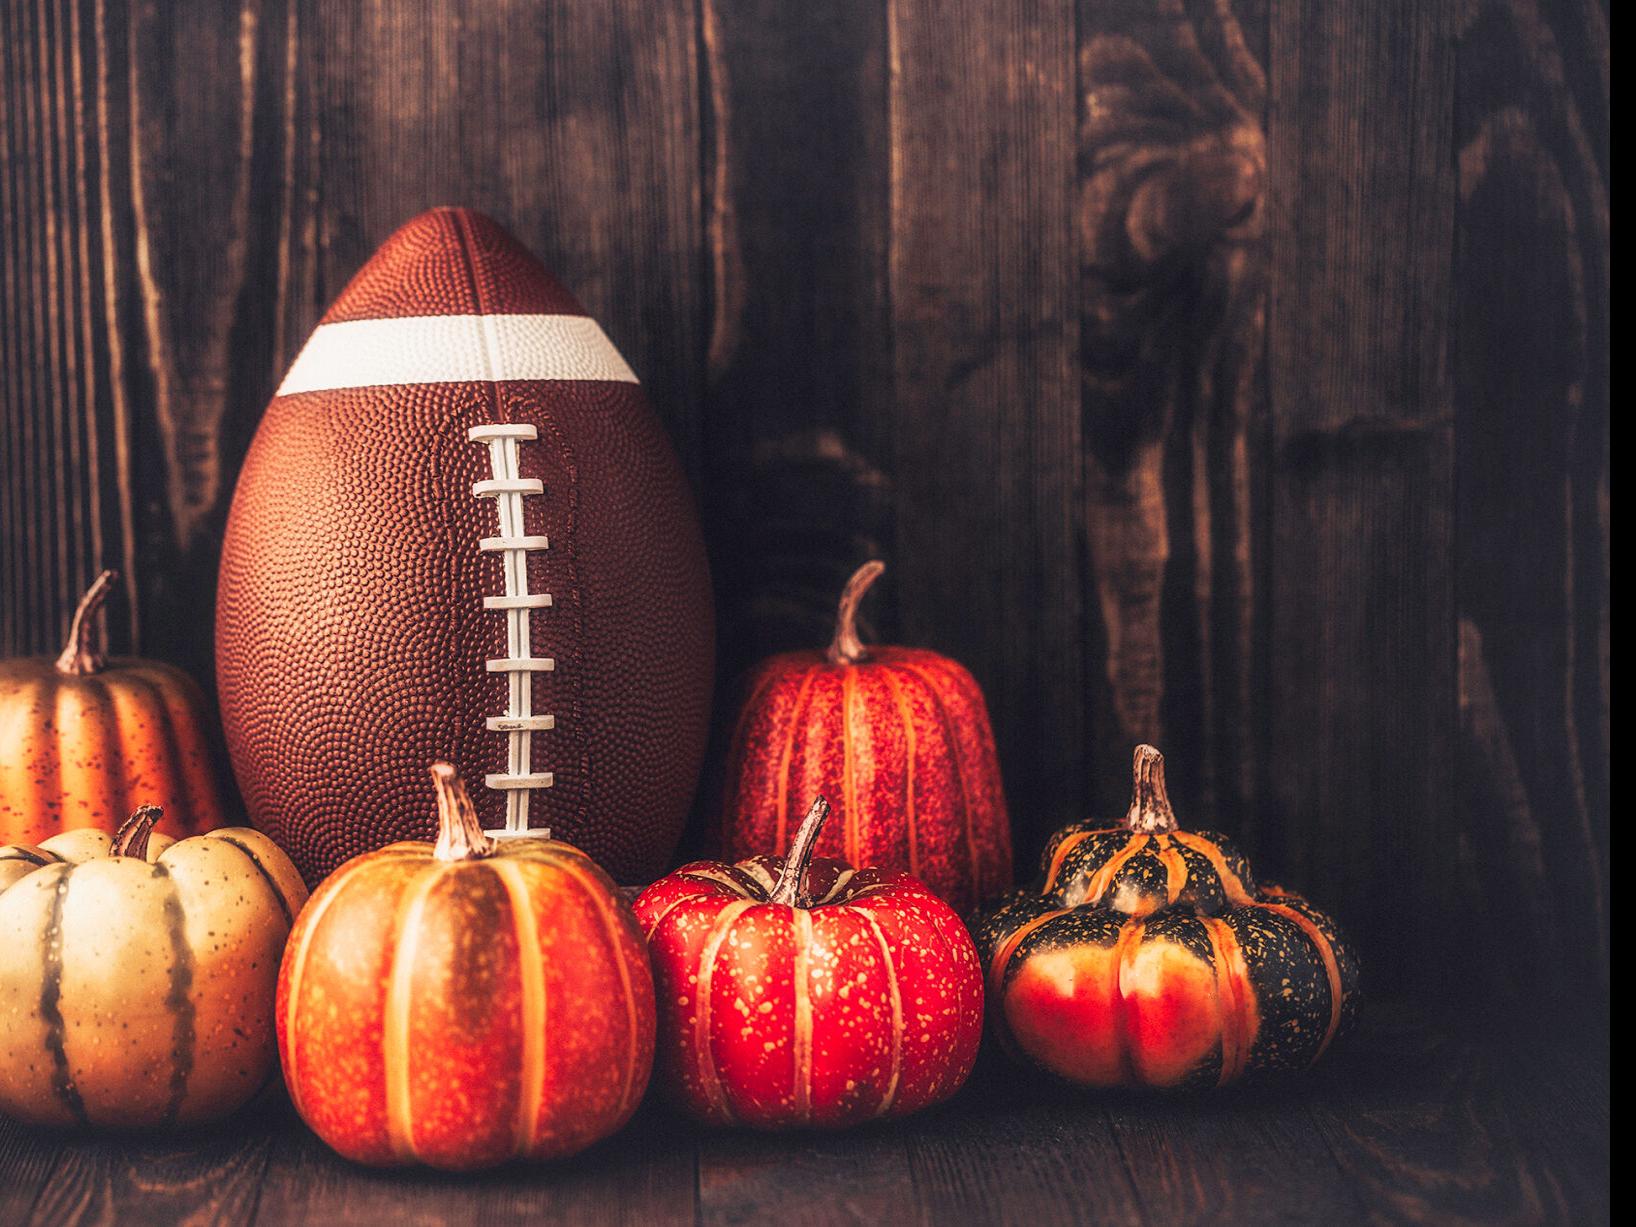 Best NFL Bets for 3 Thanksgiving Day Football Games